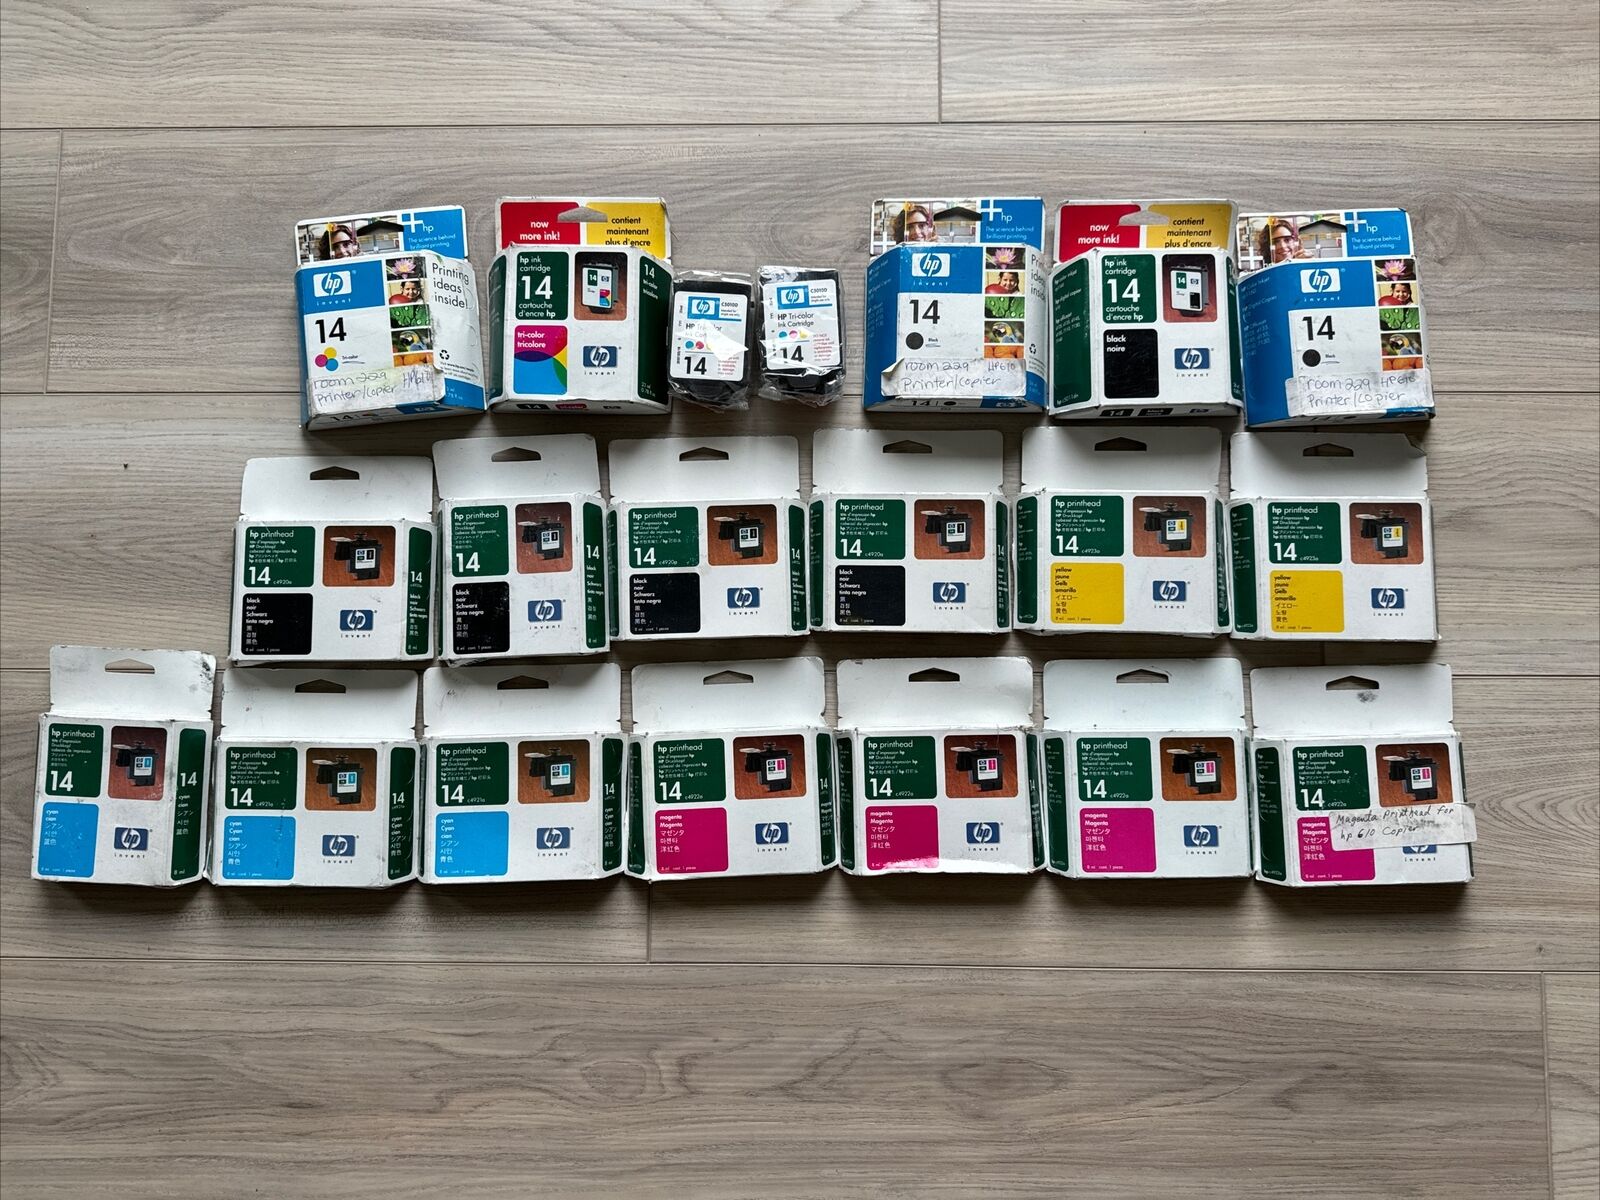 LOT of 20 HP Ink Expired - mostly new in box but expired